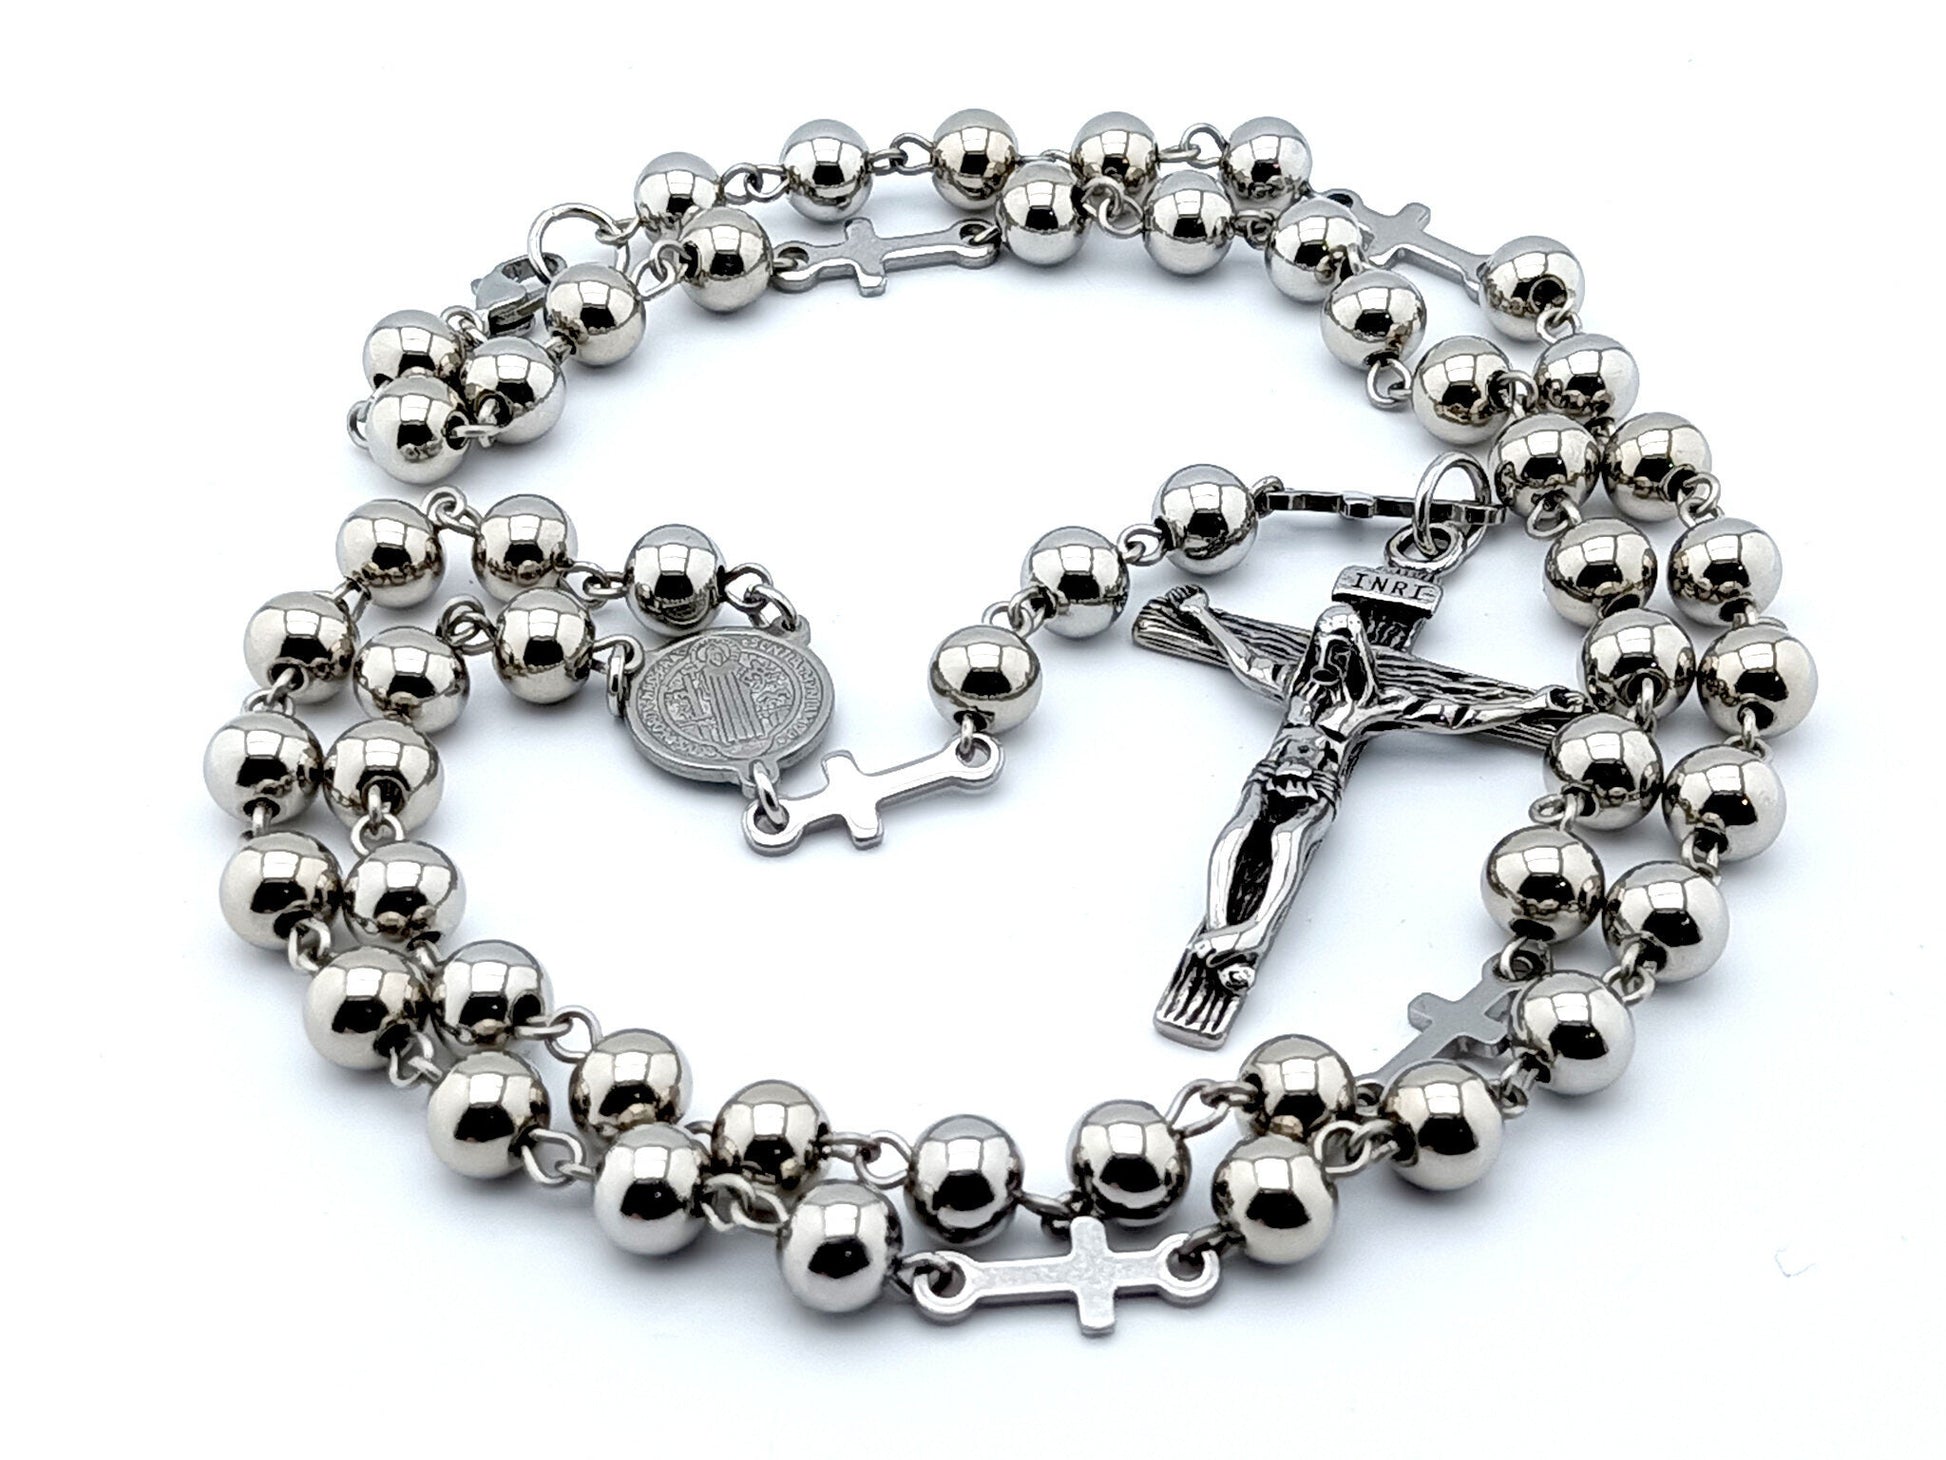 Saint Benedict unique rosary beads with stainless steel beads , crucifix, clasp and medals.